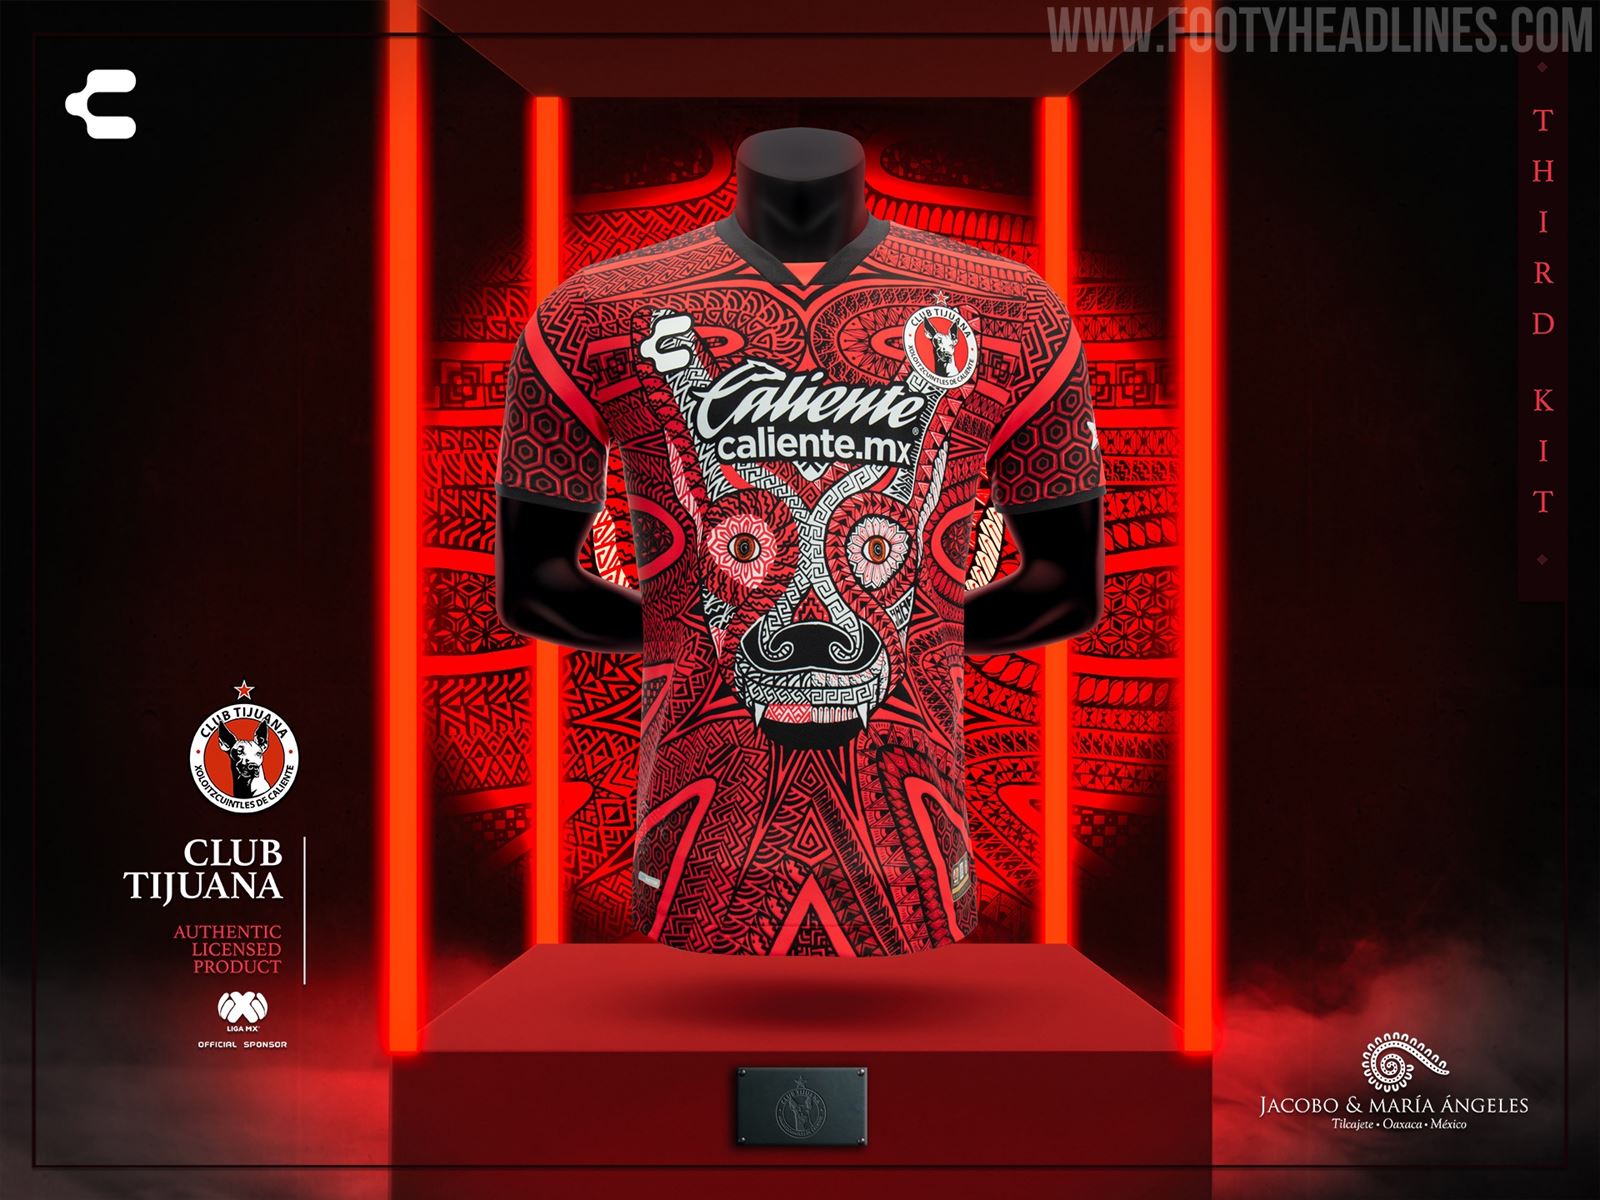  Charly Liga MX Men's Soccer Third Jersey - Special Edition  Alebrijes with Master Artisan Design : Clothing, Shoes & Jewelry